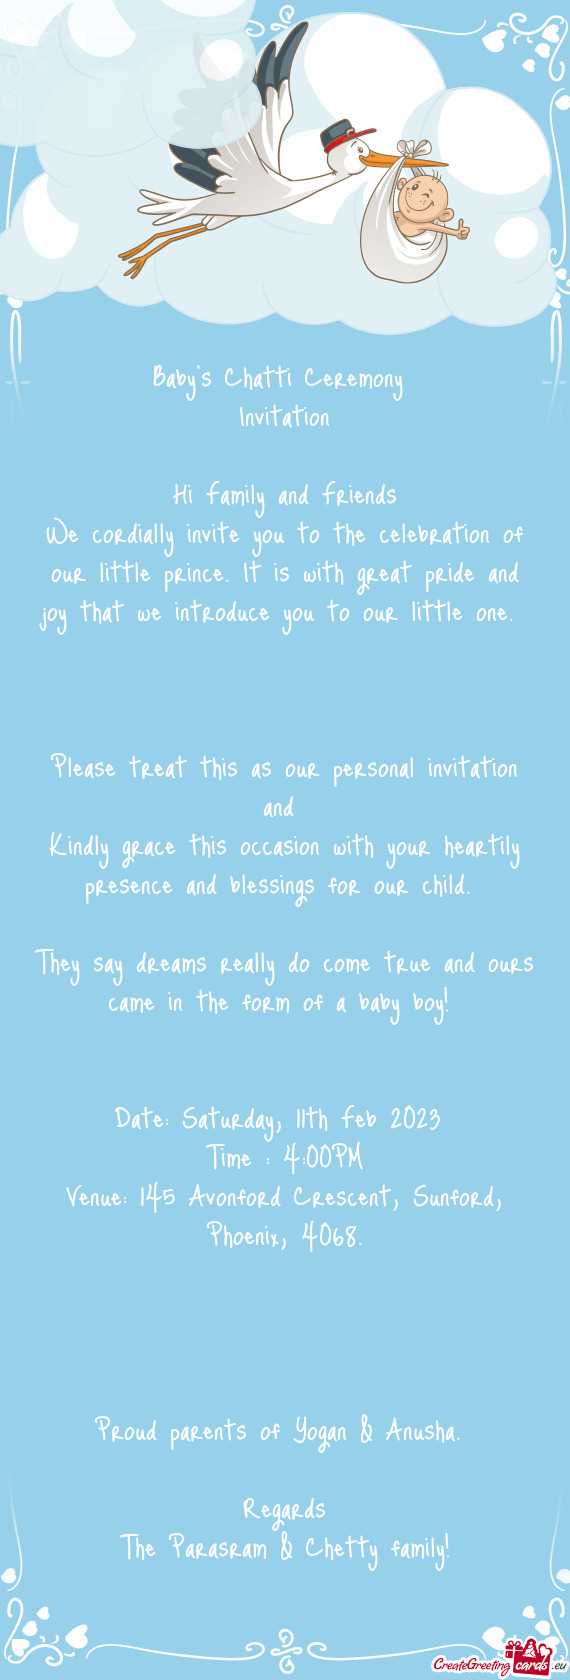 We cordially invite you to the celebration of our little prince. It is with great pride and joy that